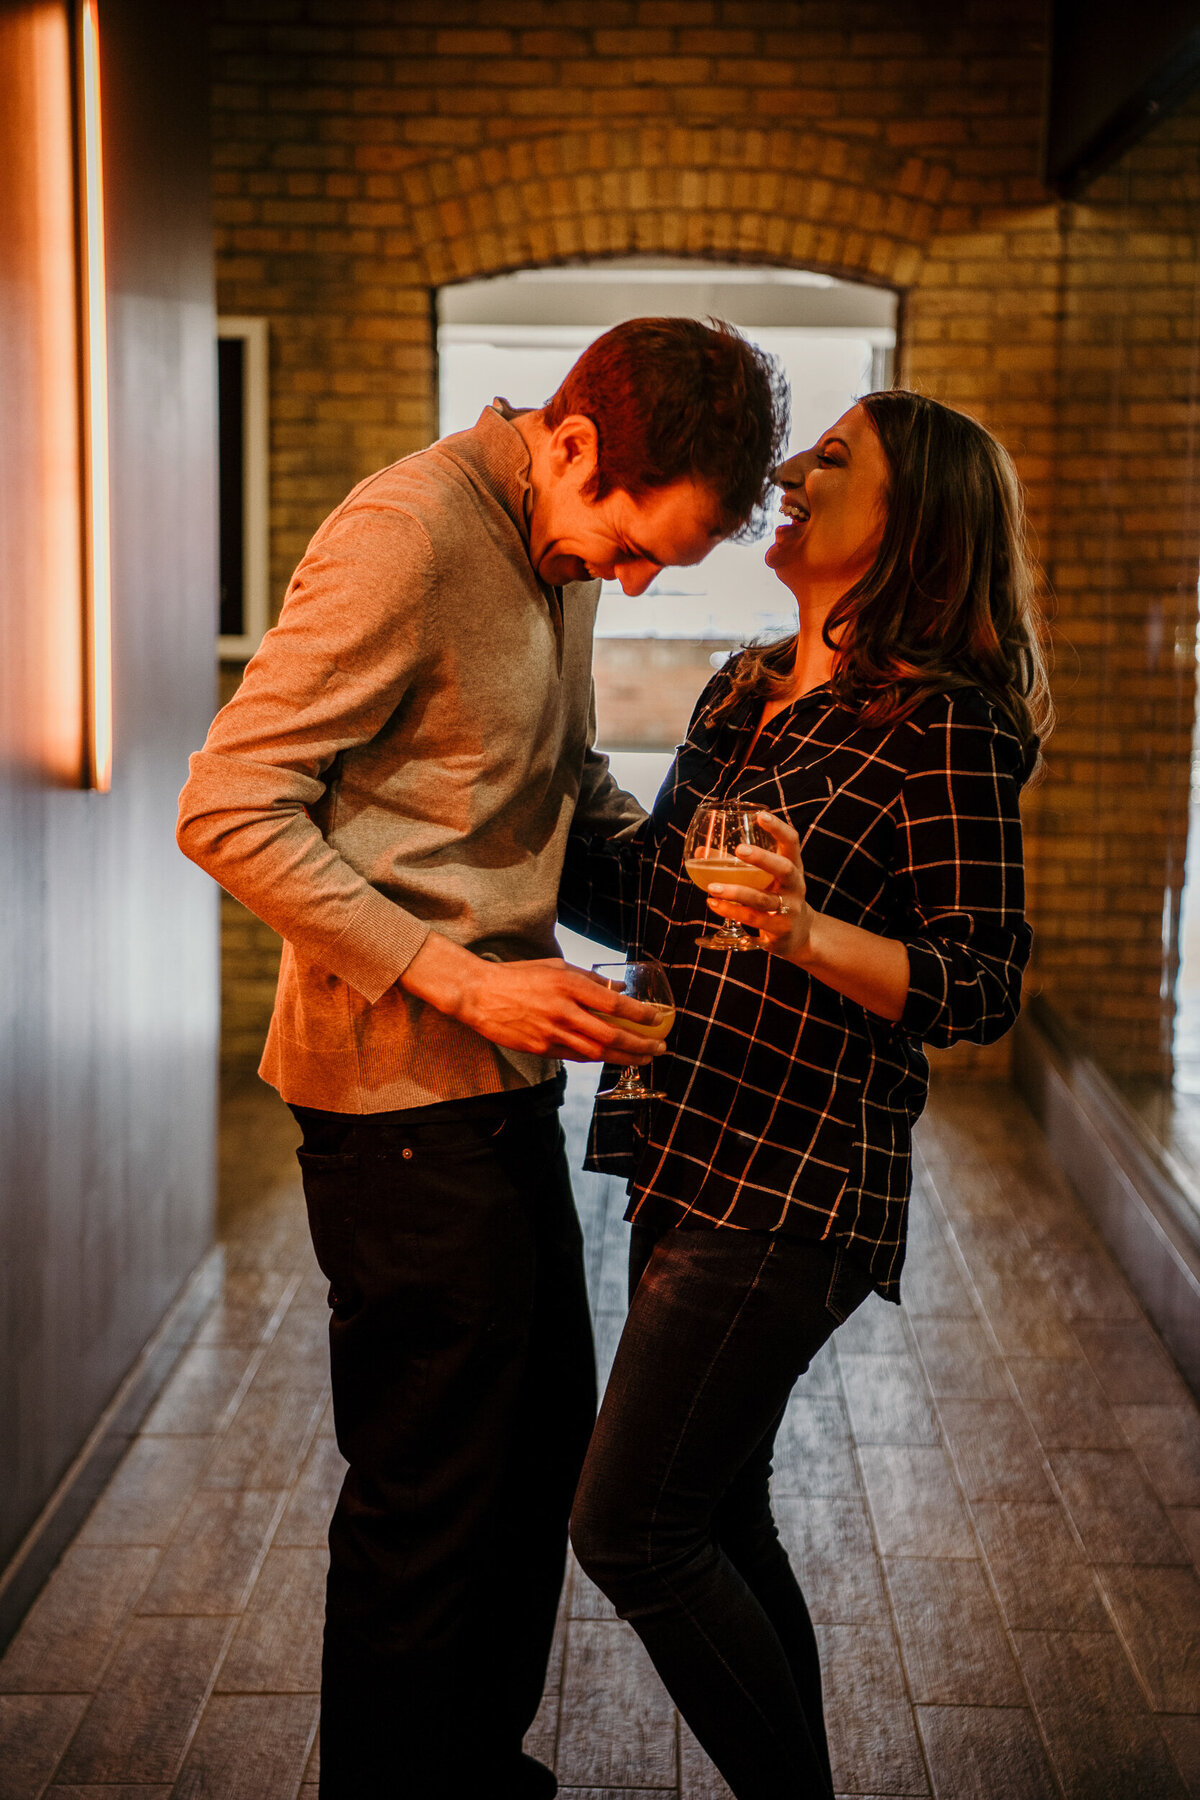 Woman and man laugh in a brewery hallway while holding drinks.